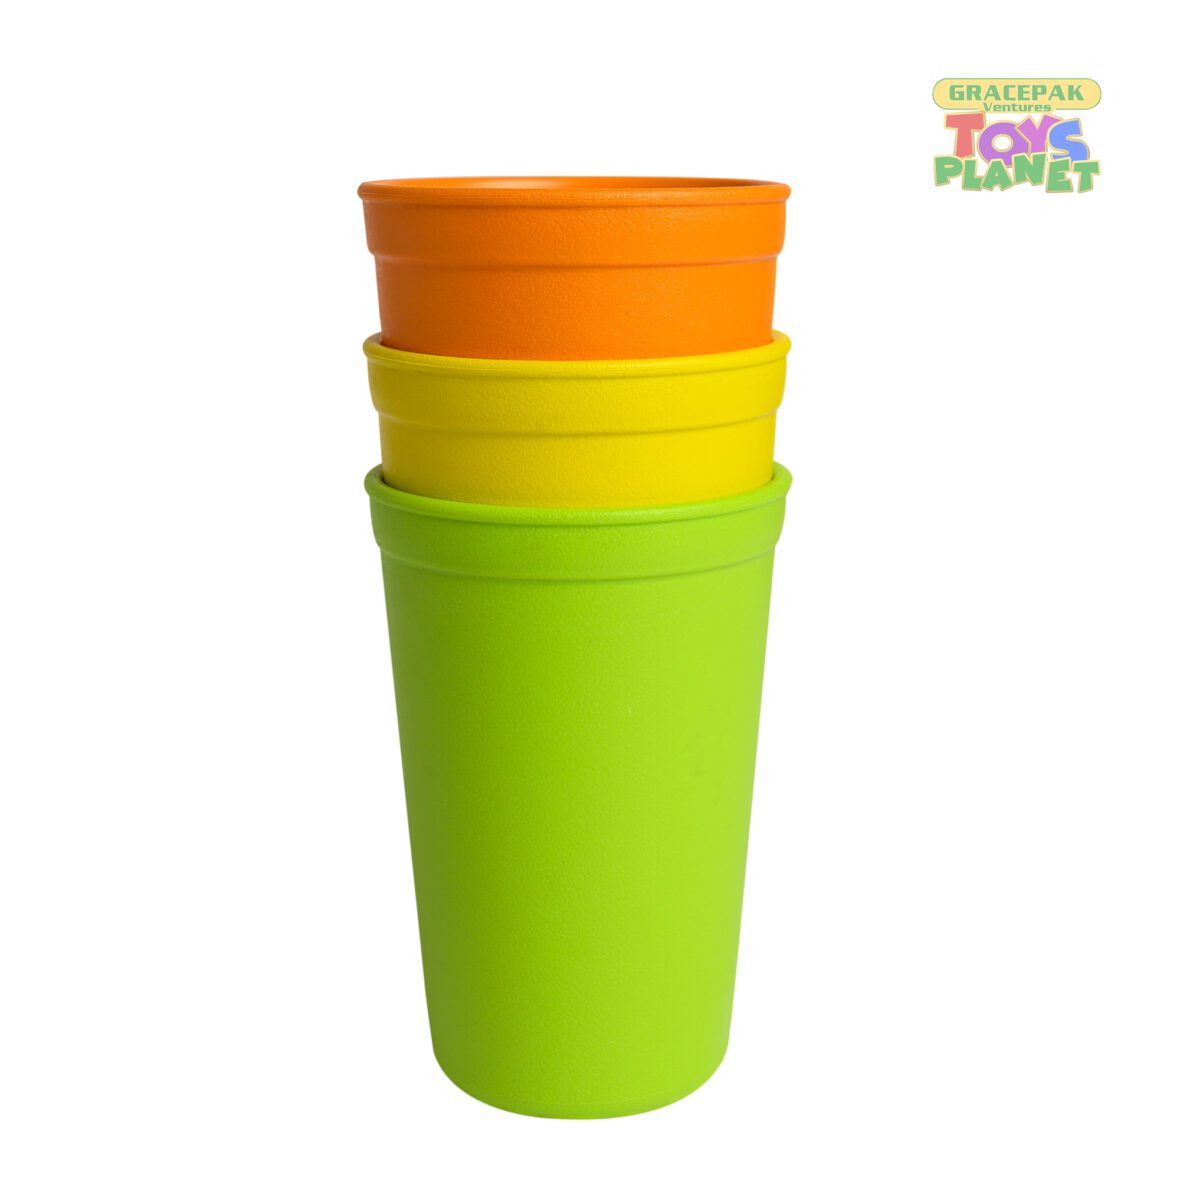 Replay_Packaged Drinking Cups-10oz_1